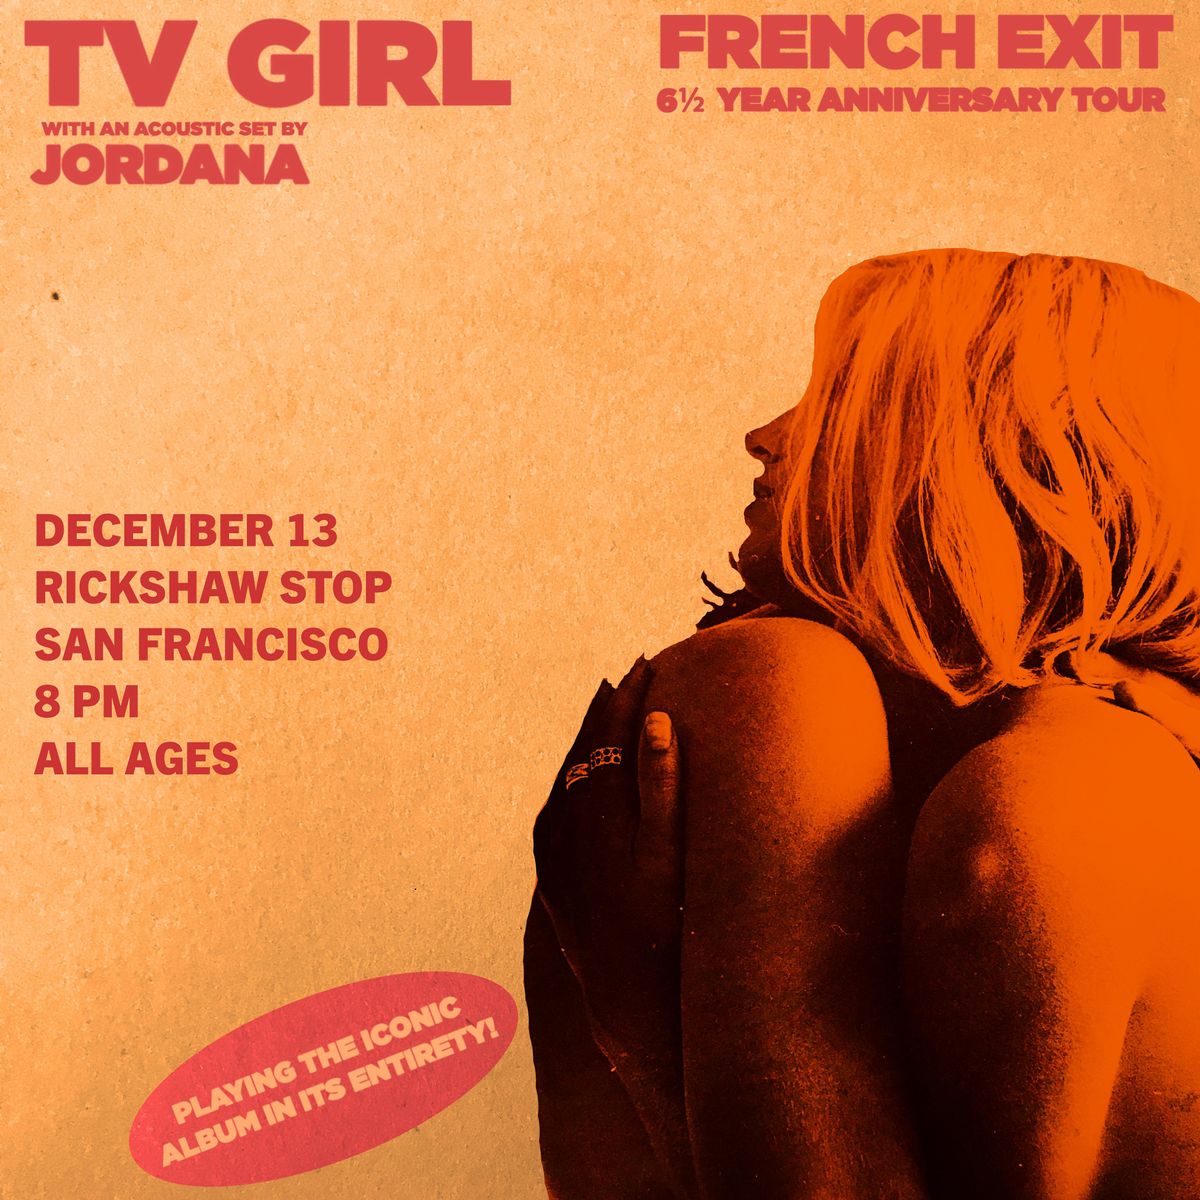 TV GIRL\u2019s 6 and \u00bd Year Anniversary of French Exit Tour featuring Jordana